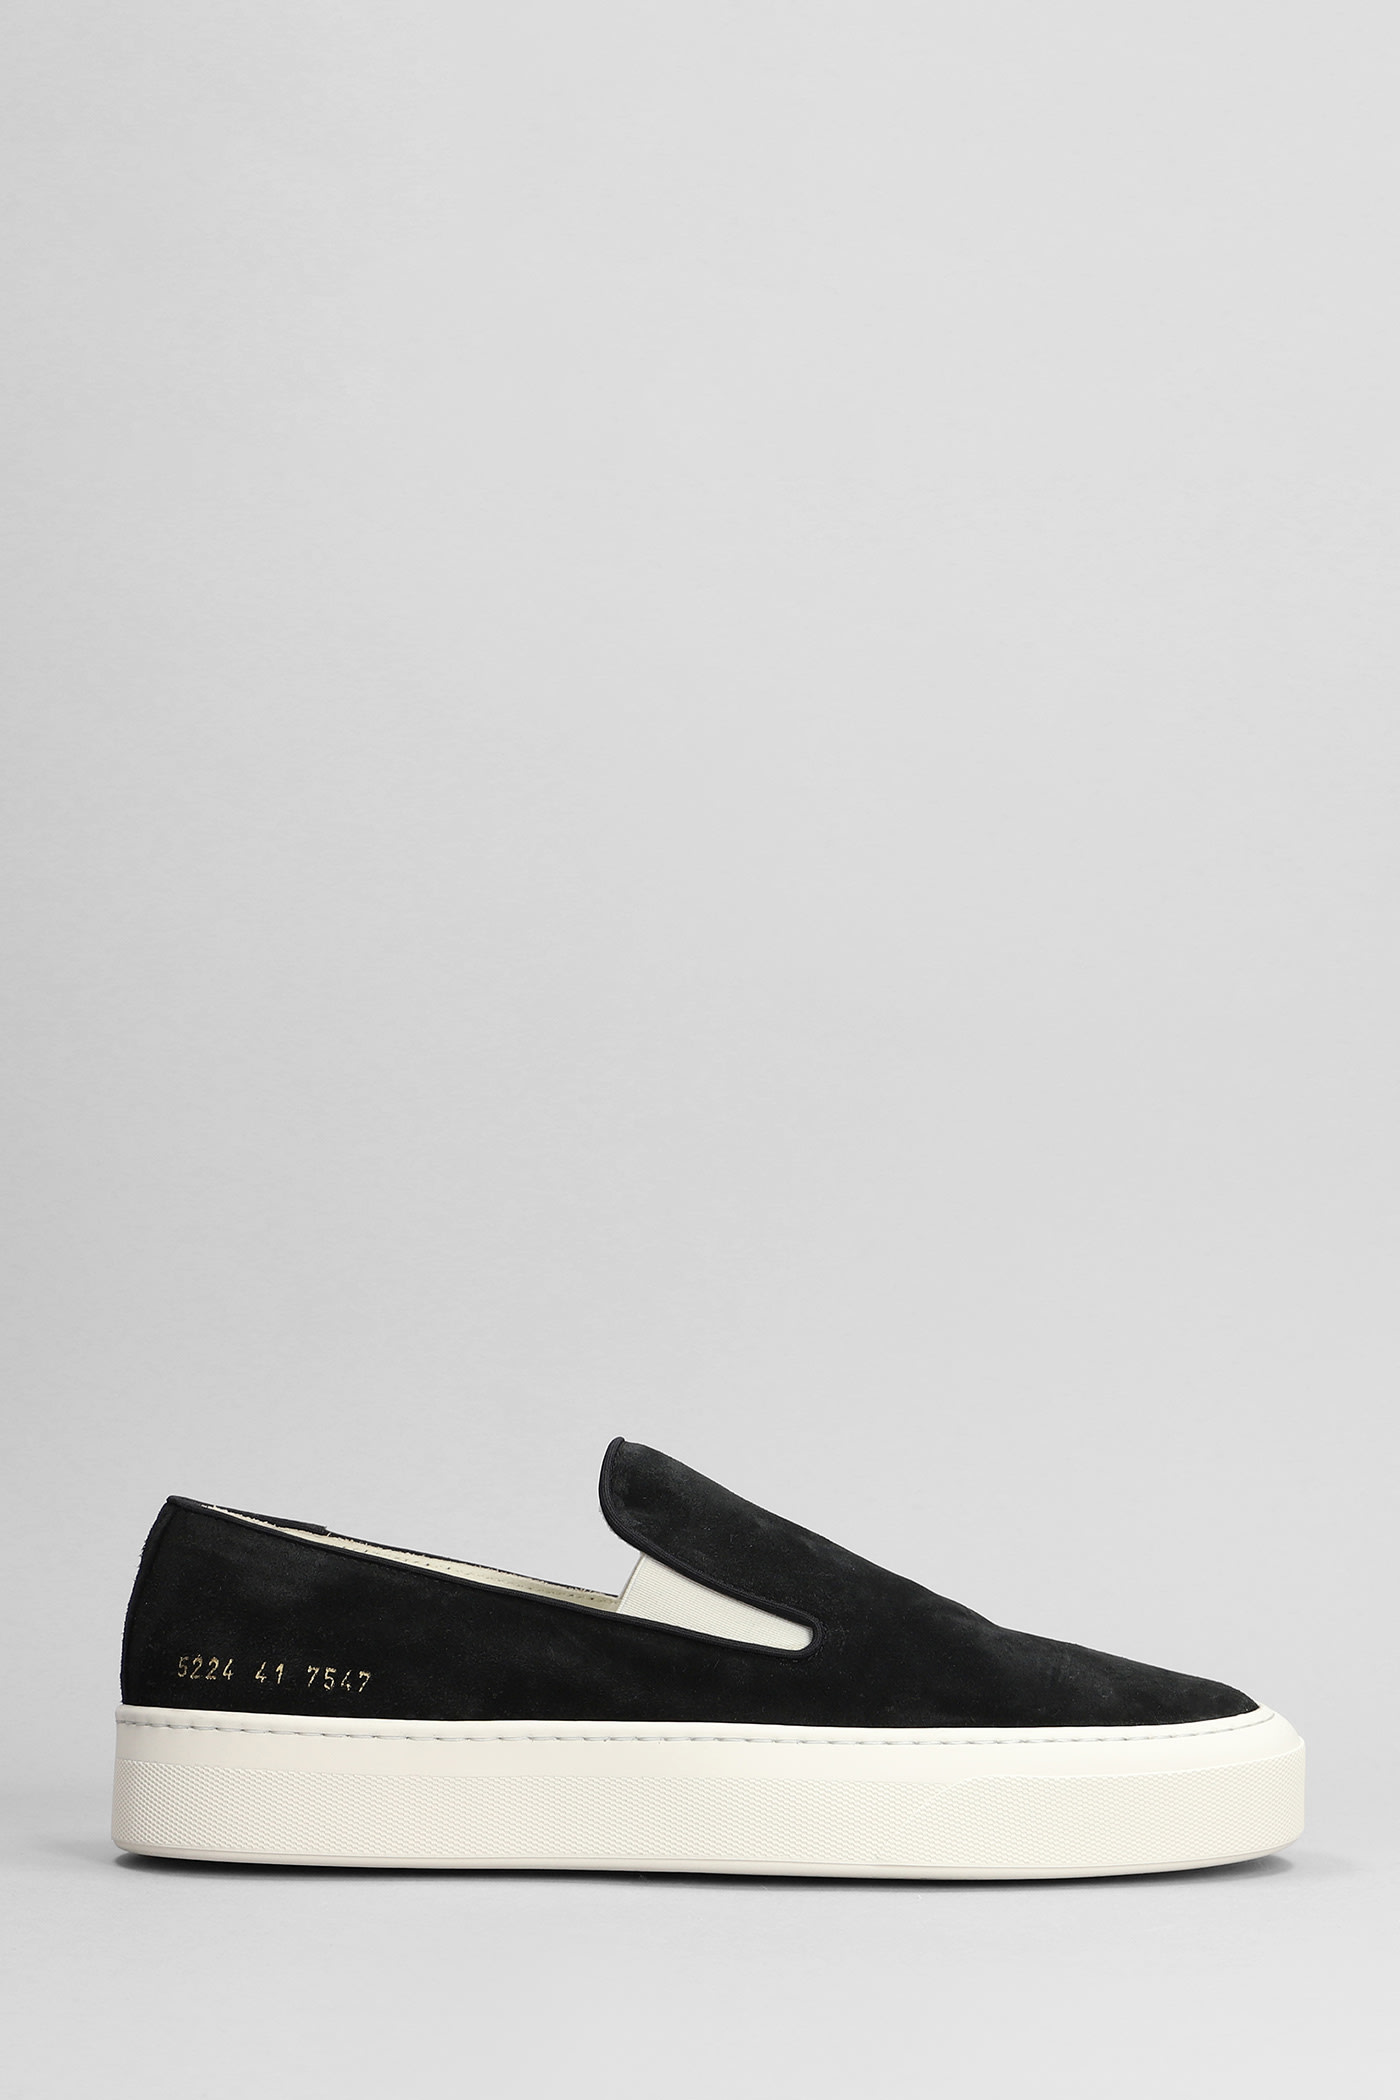 COMMON PROJECTS SNEAKERS IN BLACK SUEDE